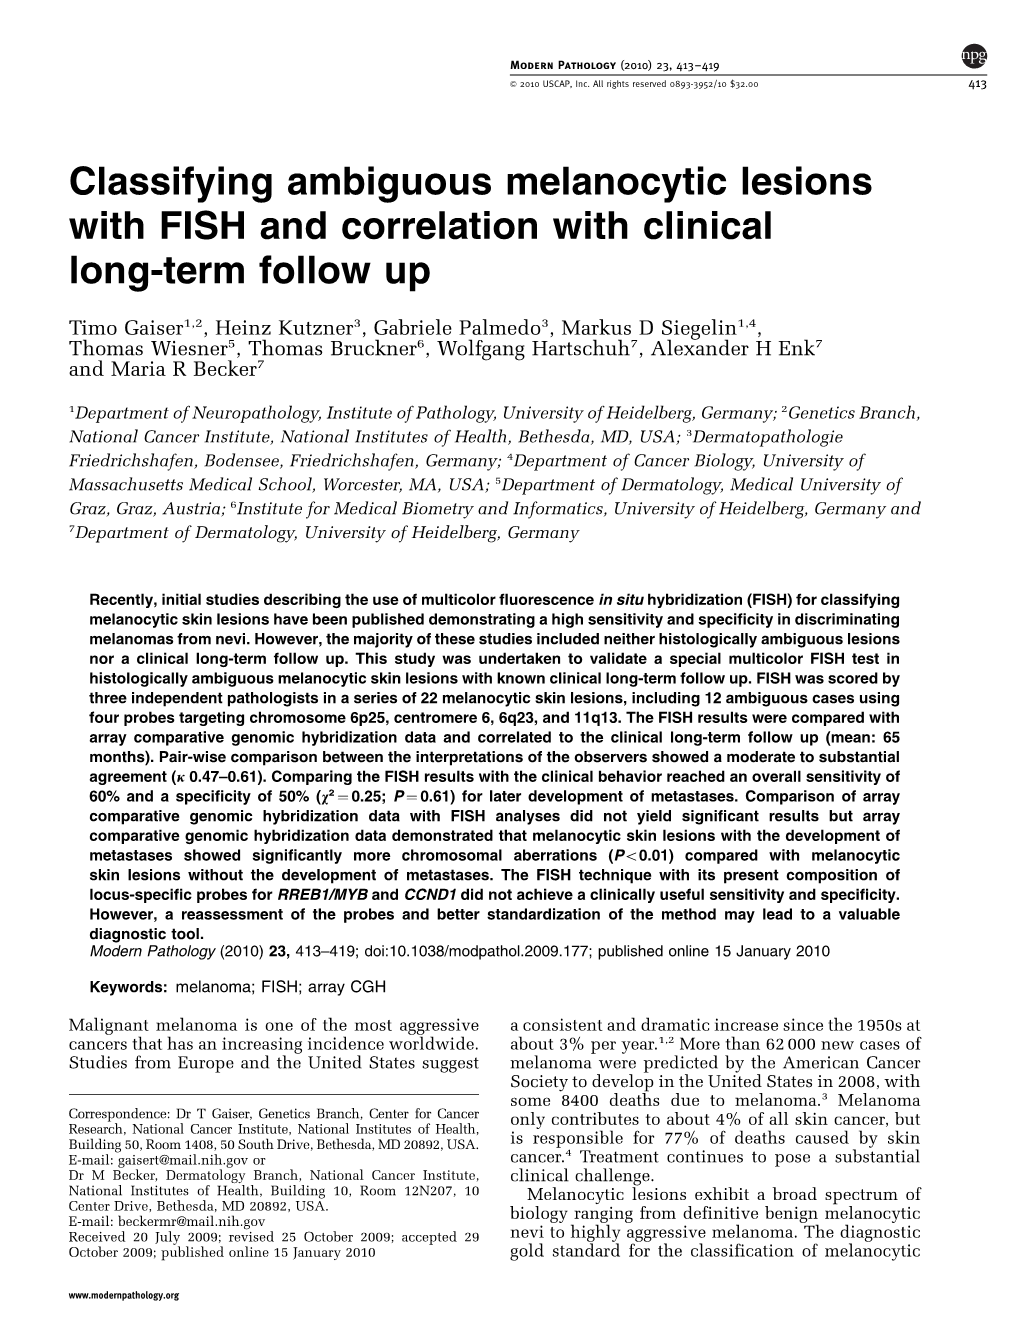 Classifying Ambiguous Melanocytic Lesions with FISH and Correlation with Clinical Long-Term Follow Up